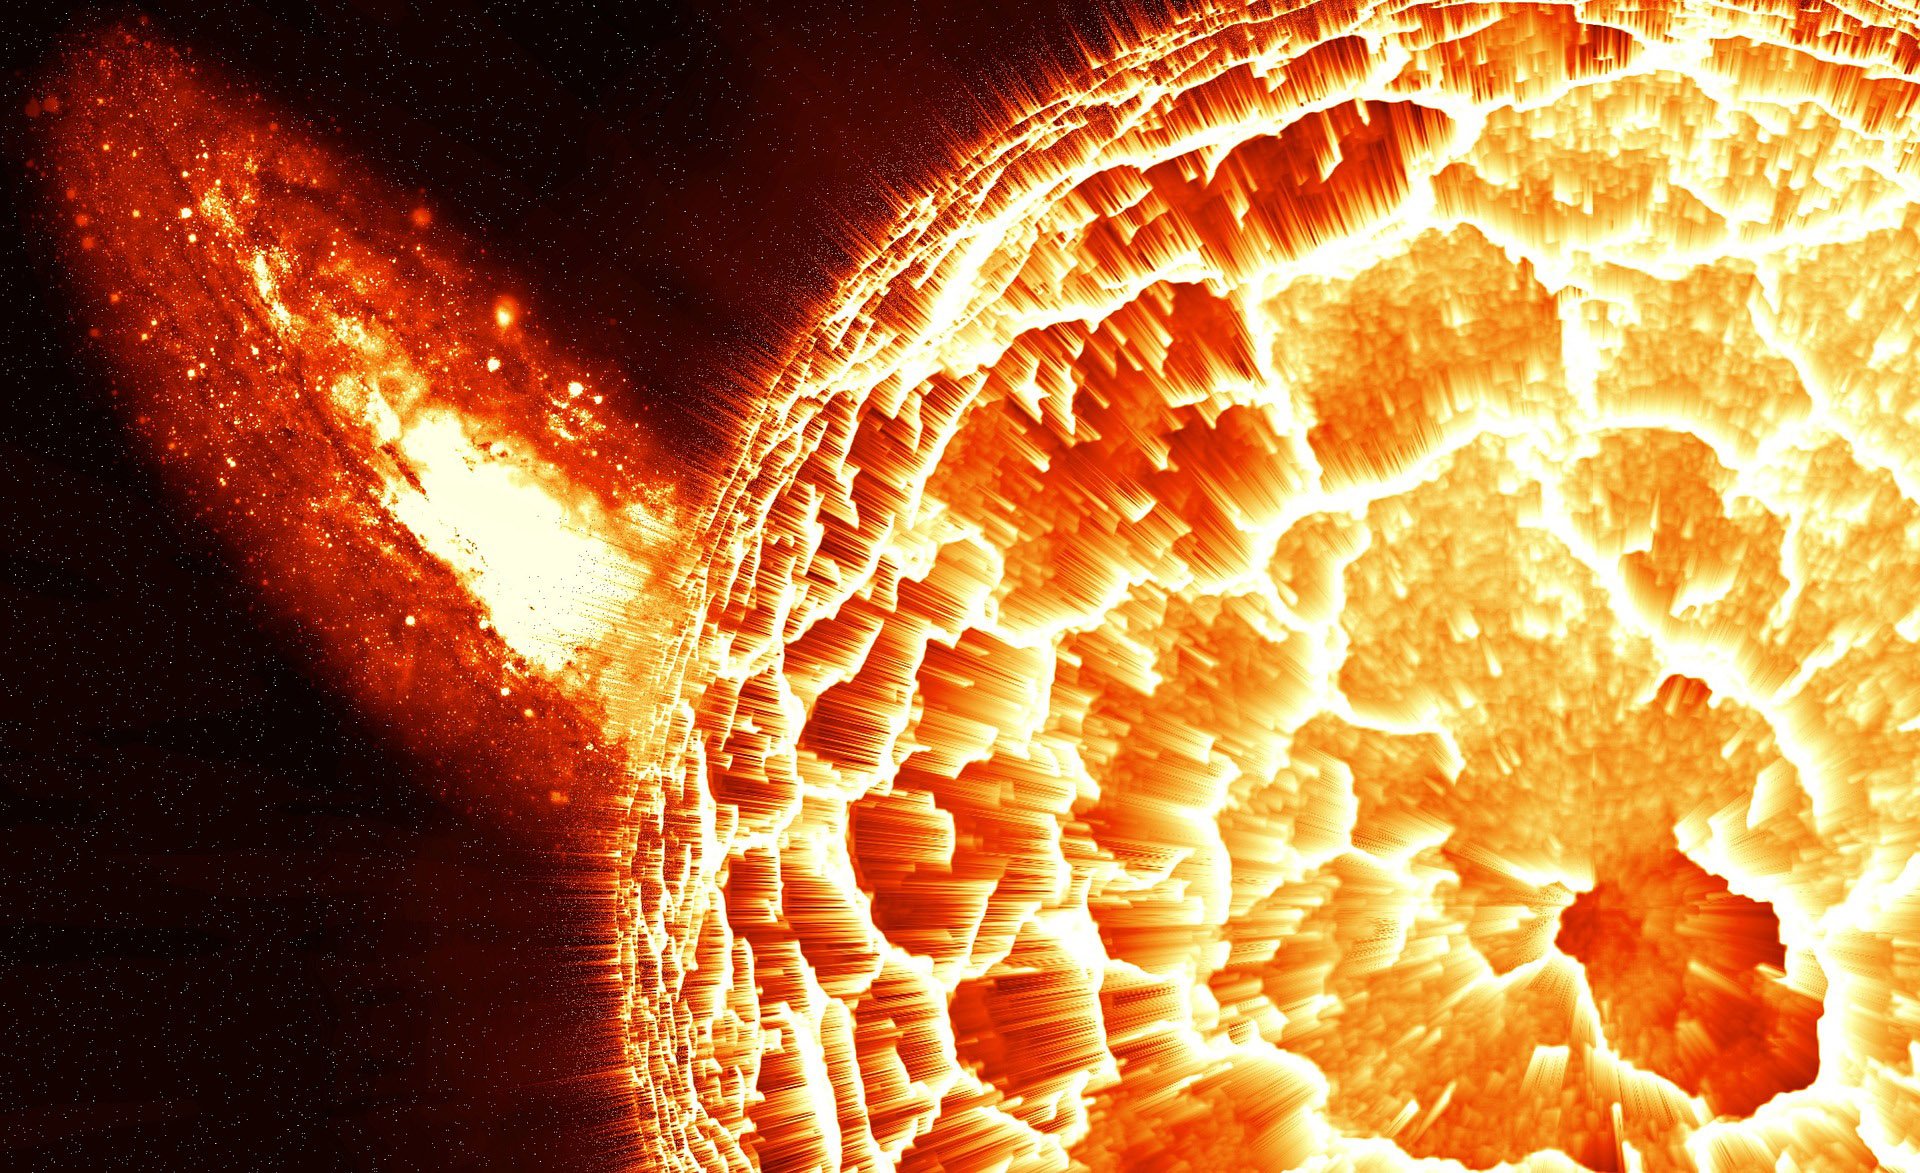 Scientists Believe They Have Determined When Sun Will Explode, Killing All Life On Earth